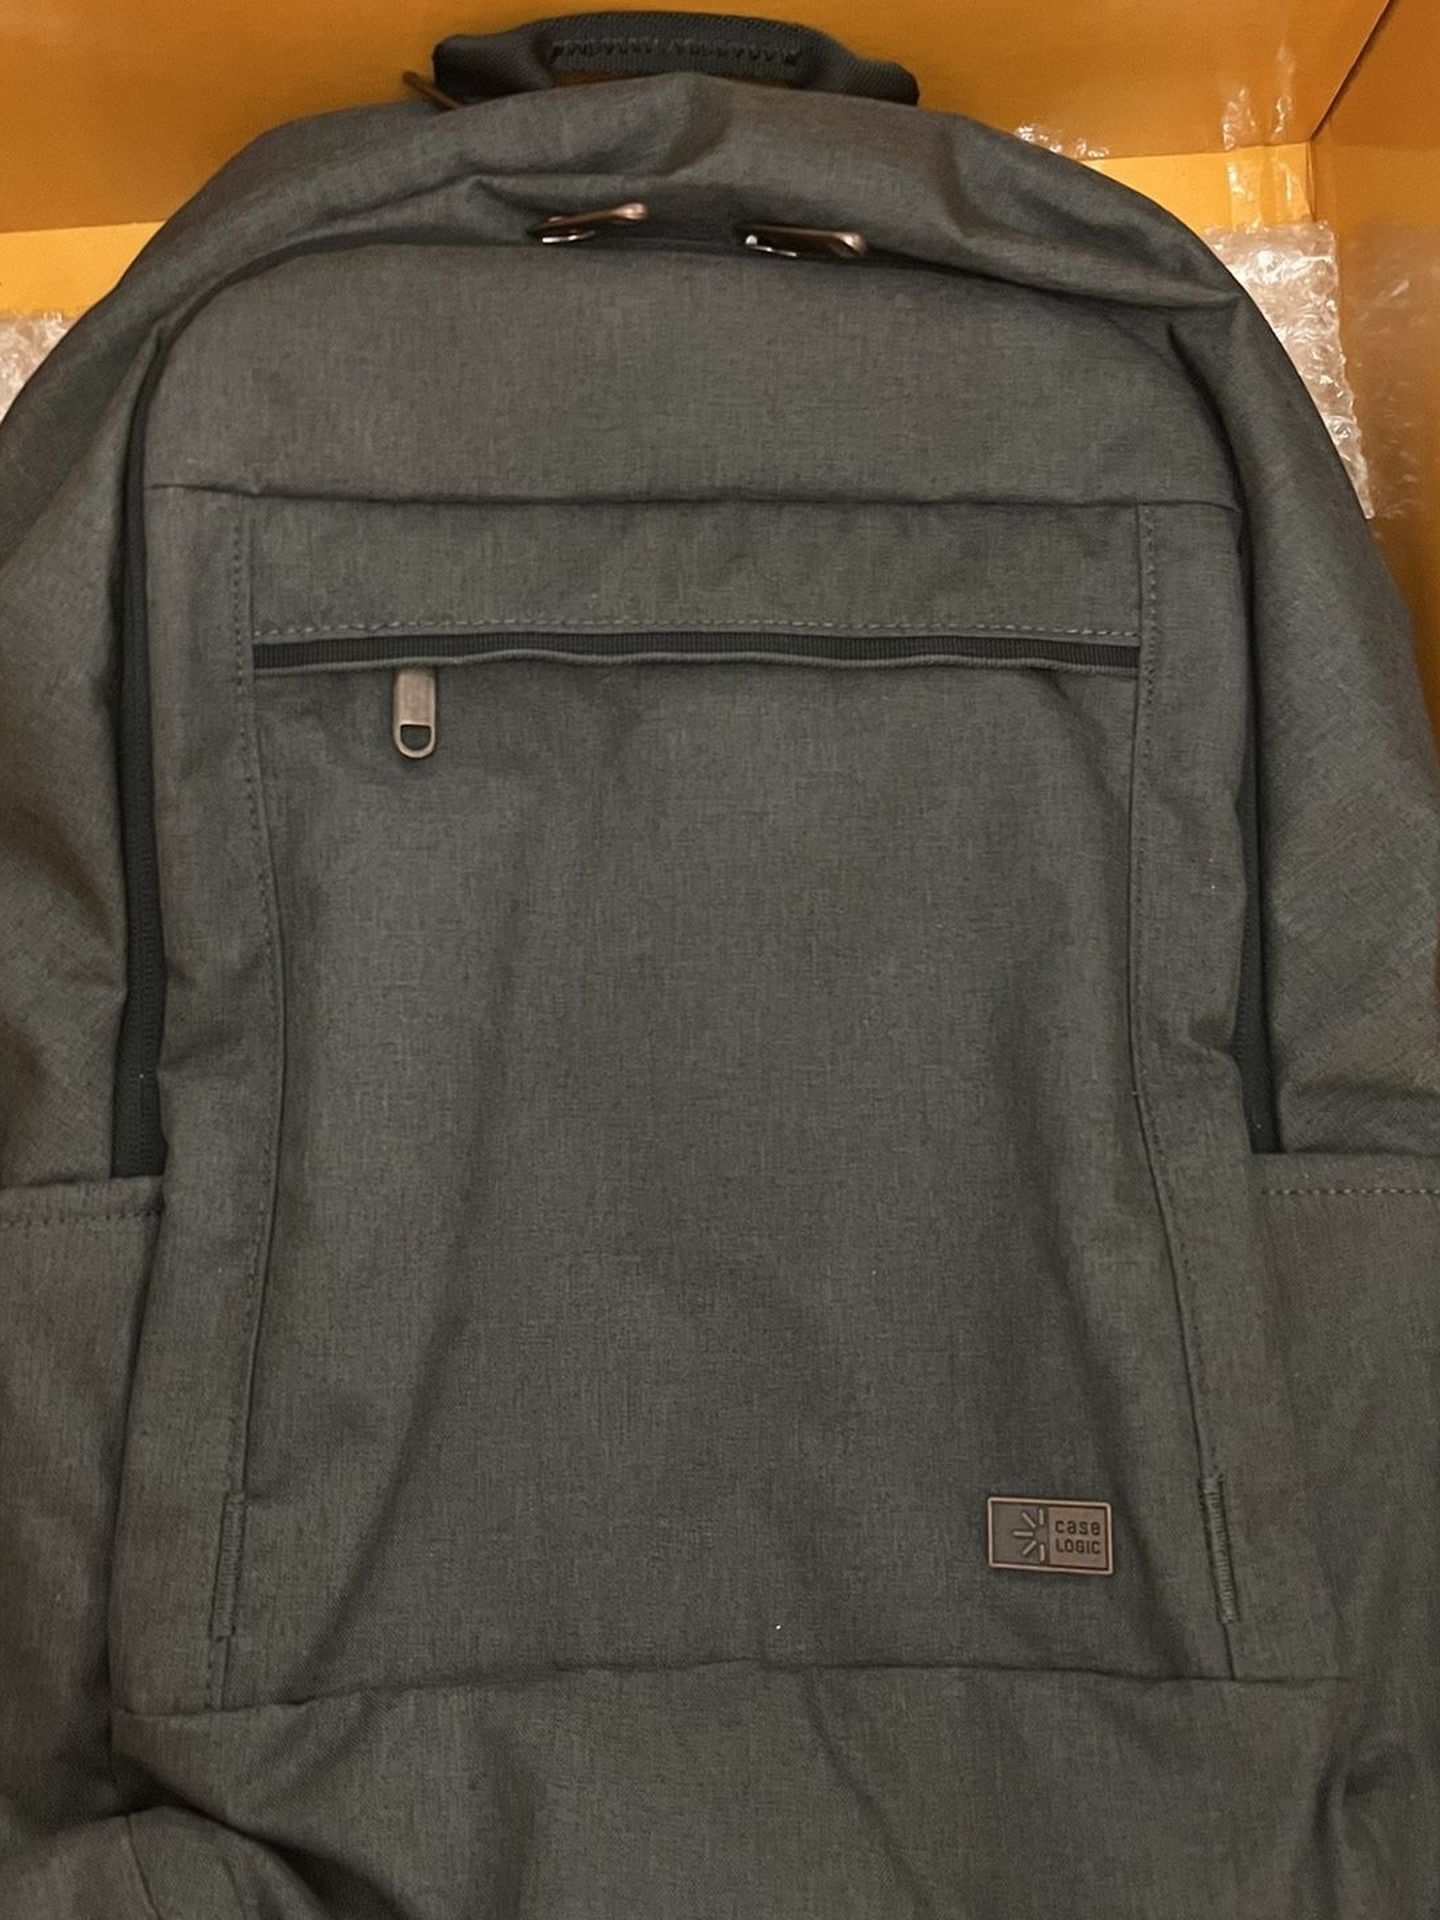 New Laptop Backpack